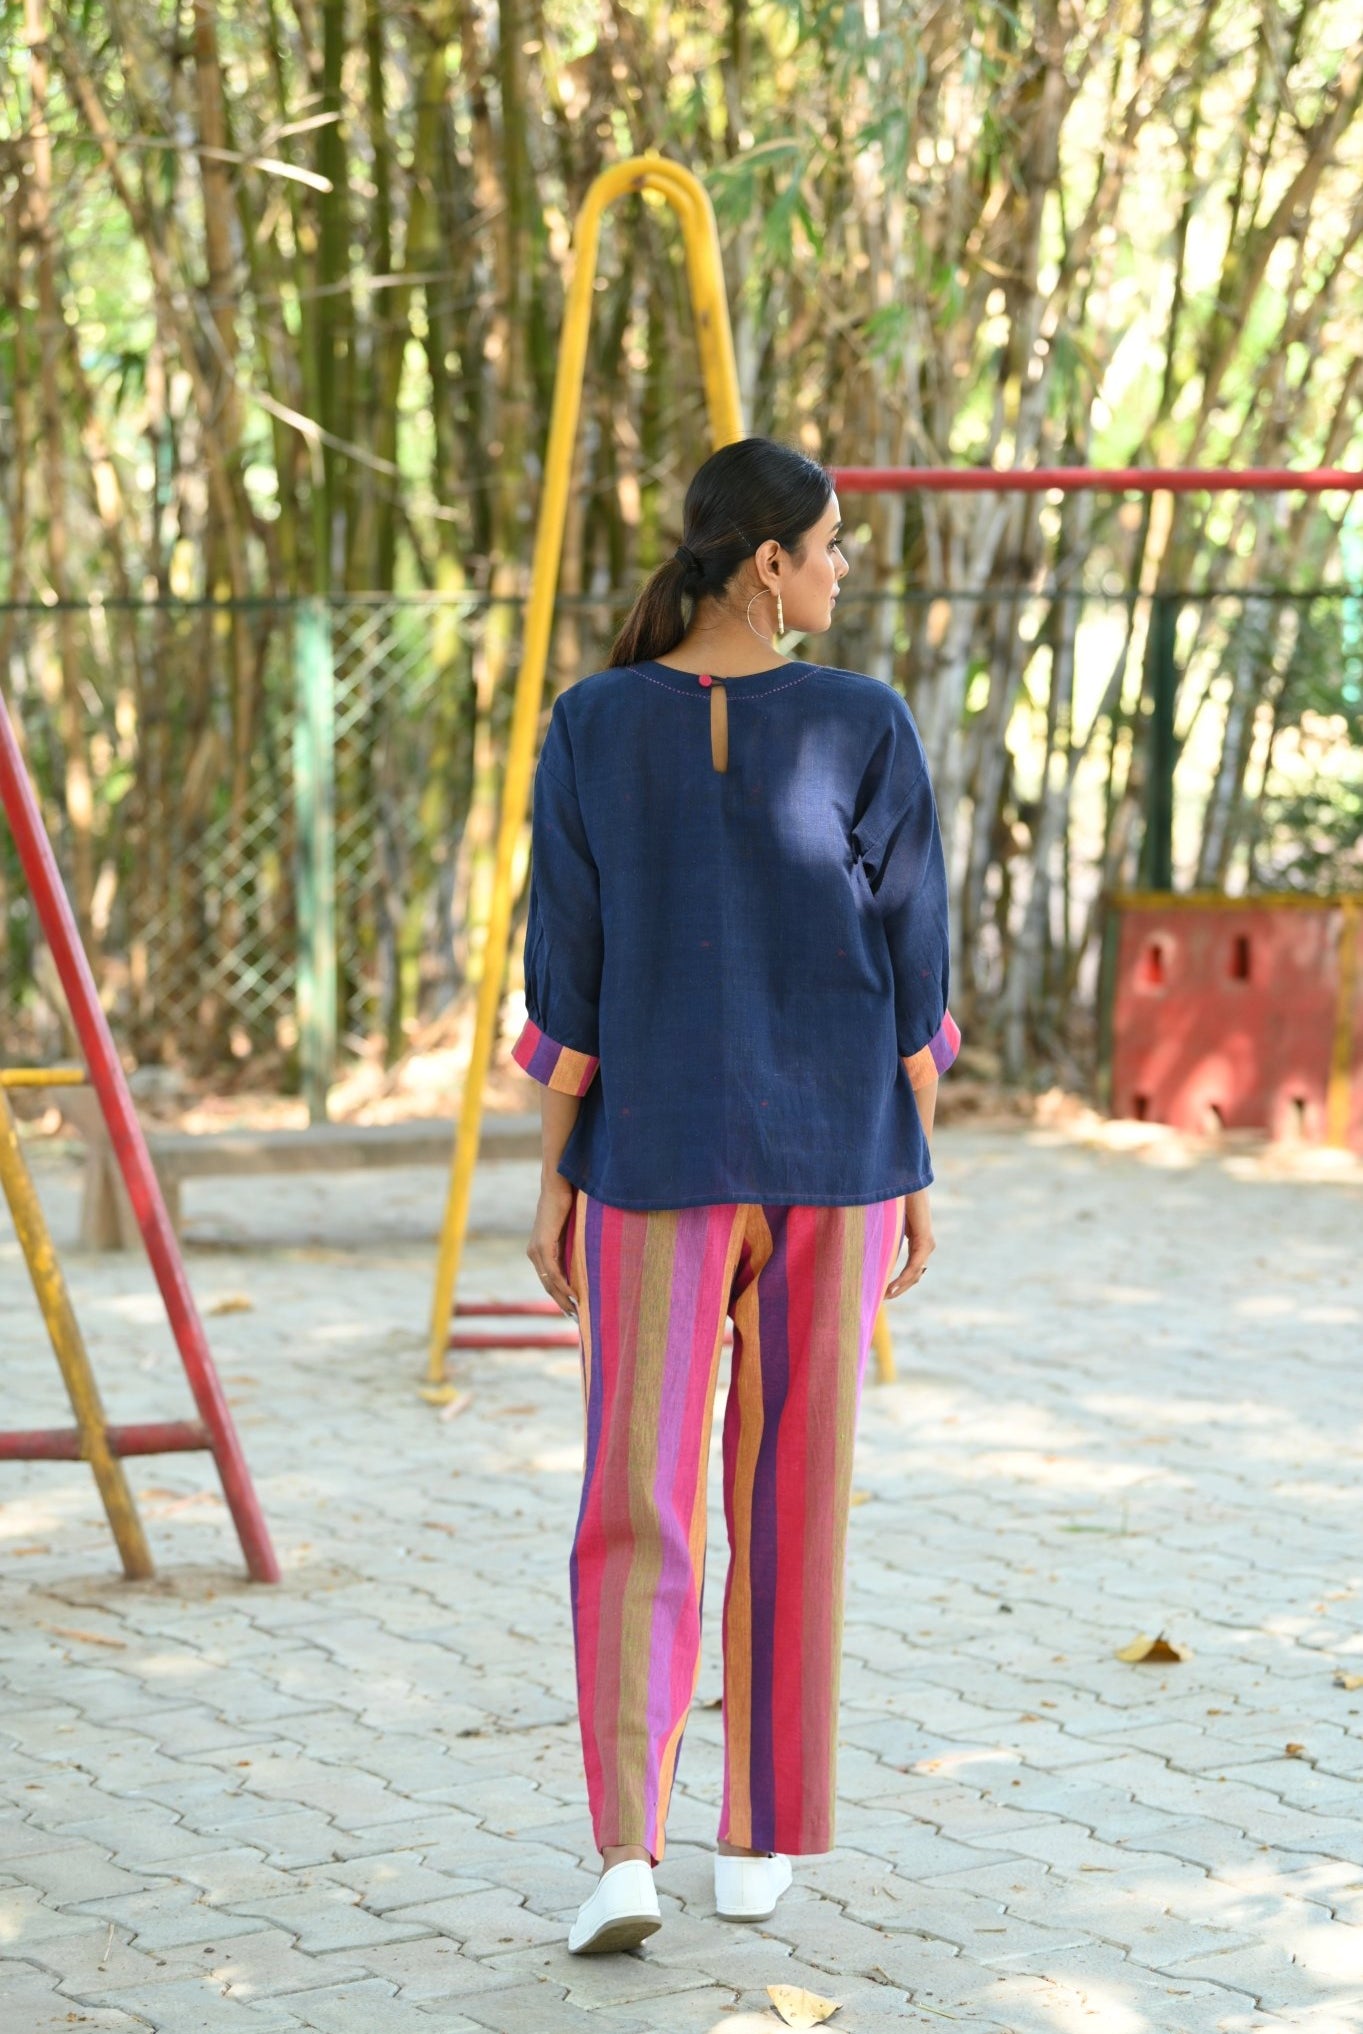 Square Cut with Cuff Sleeve Top - Blue - CiceroniTopsRang by Rajvi